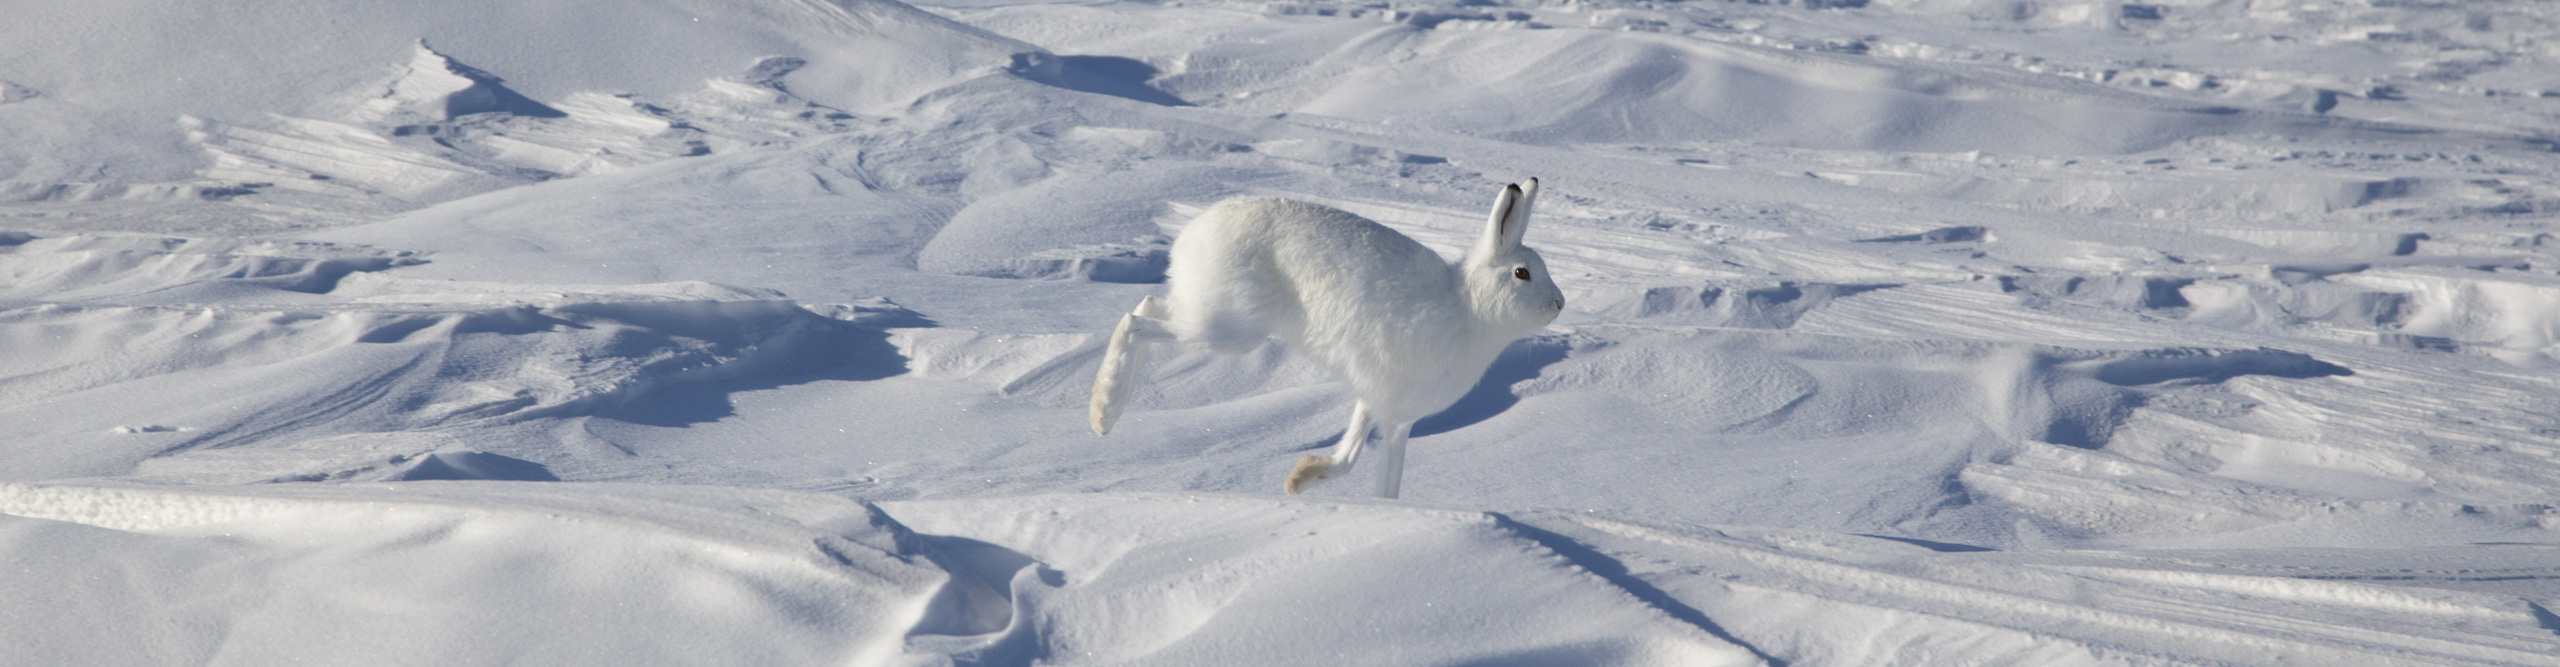 Arctic hare jumping across the snow